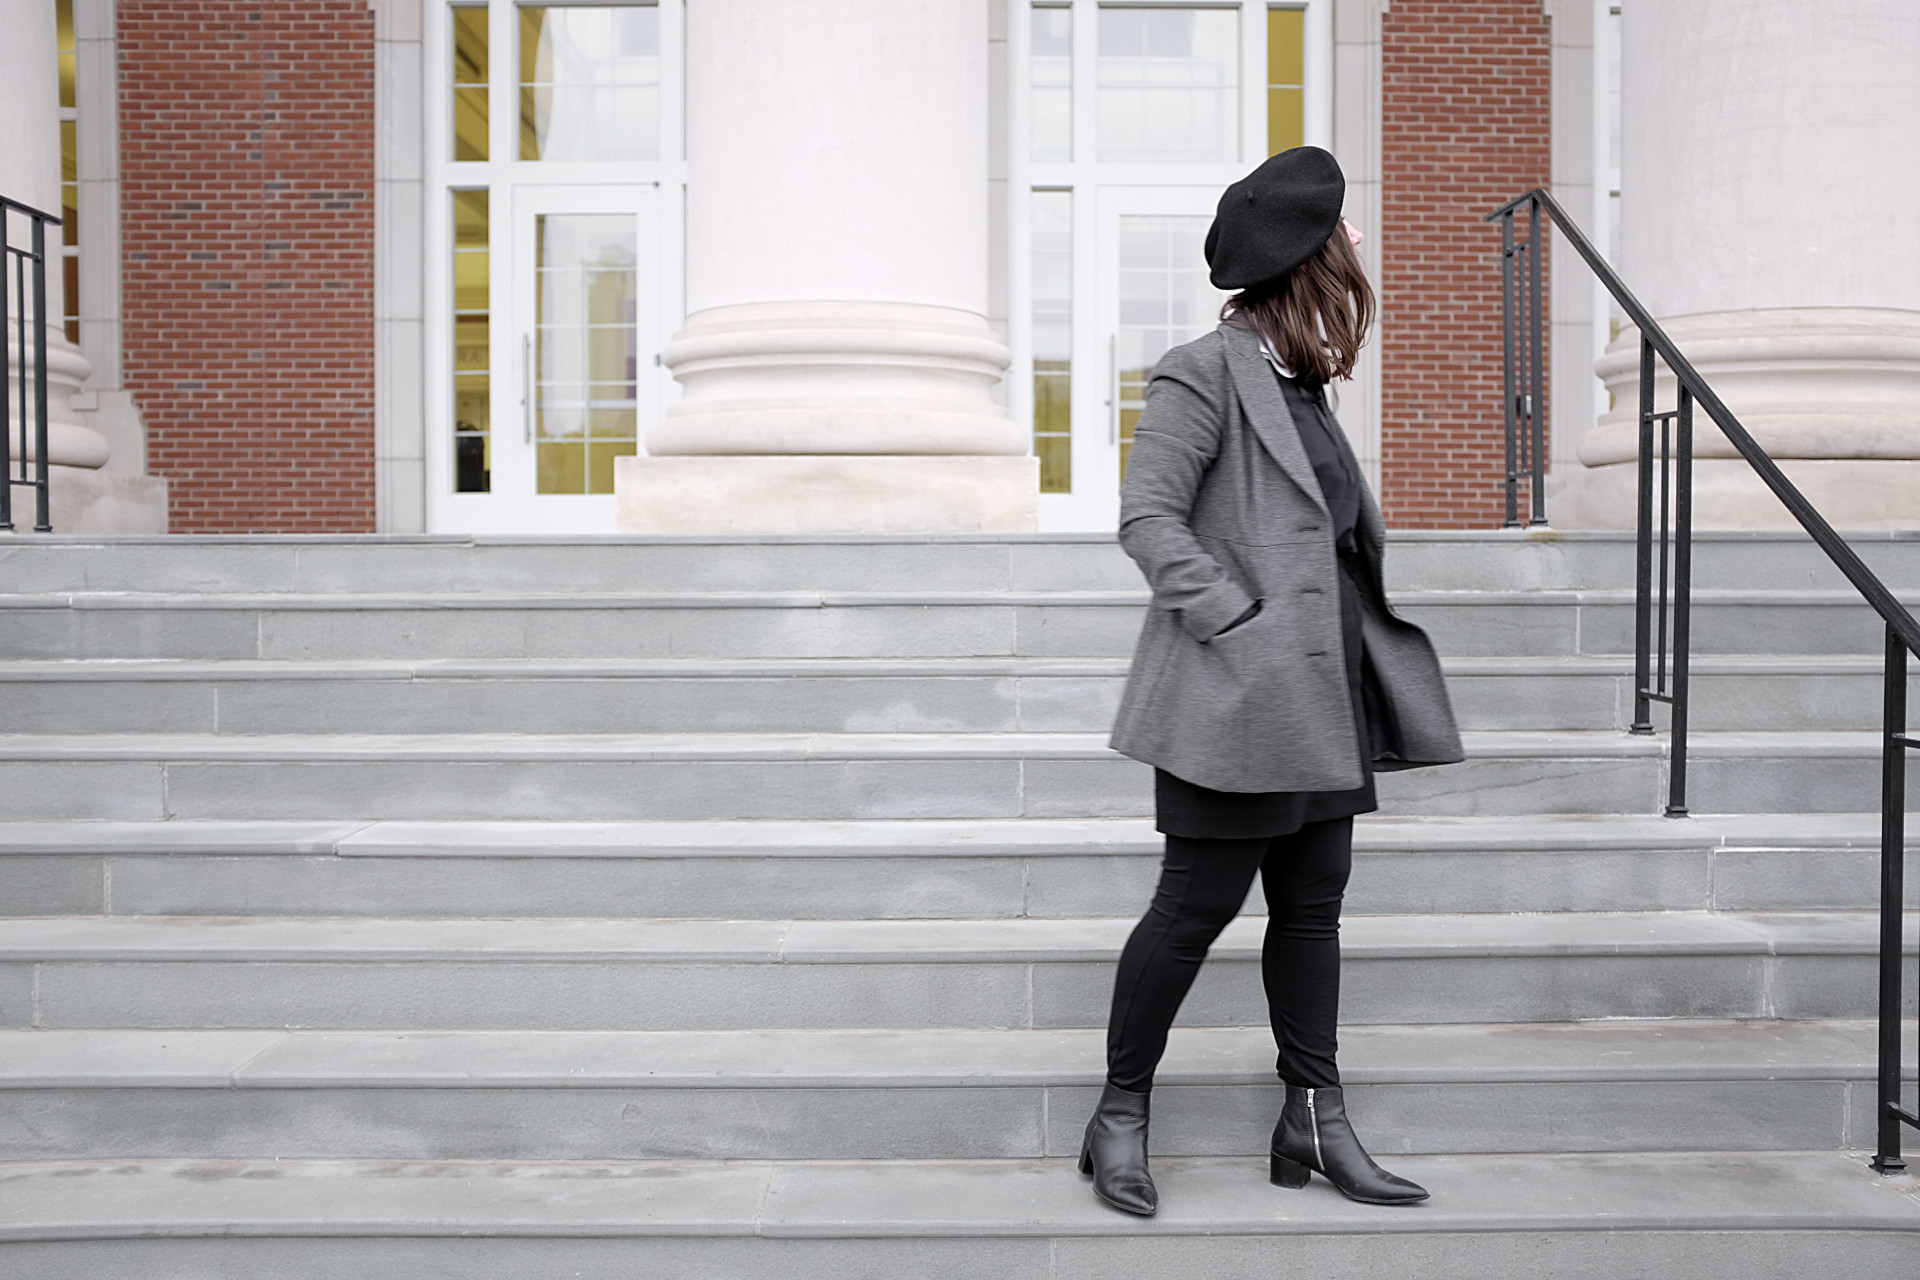 A white woman stands on steps with columns in the background. She is wearing a black beret, a white collared shirt under a black sweatshirt, a black wool skirt, a pair of black pants, black boots, and a grey coat.